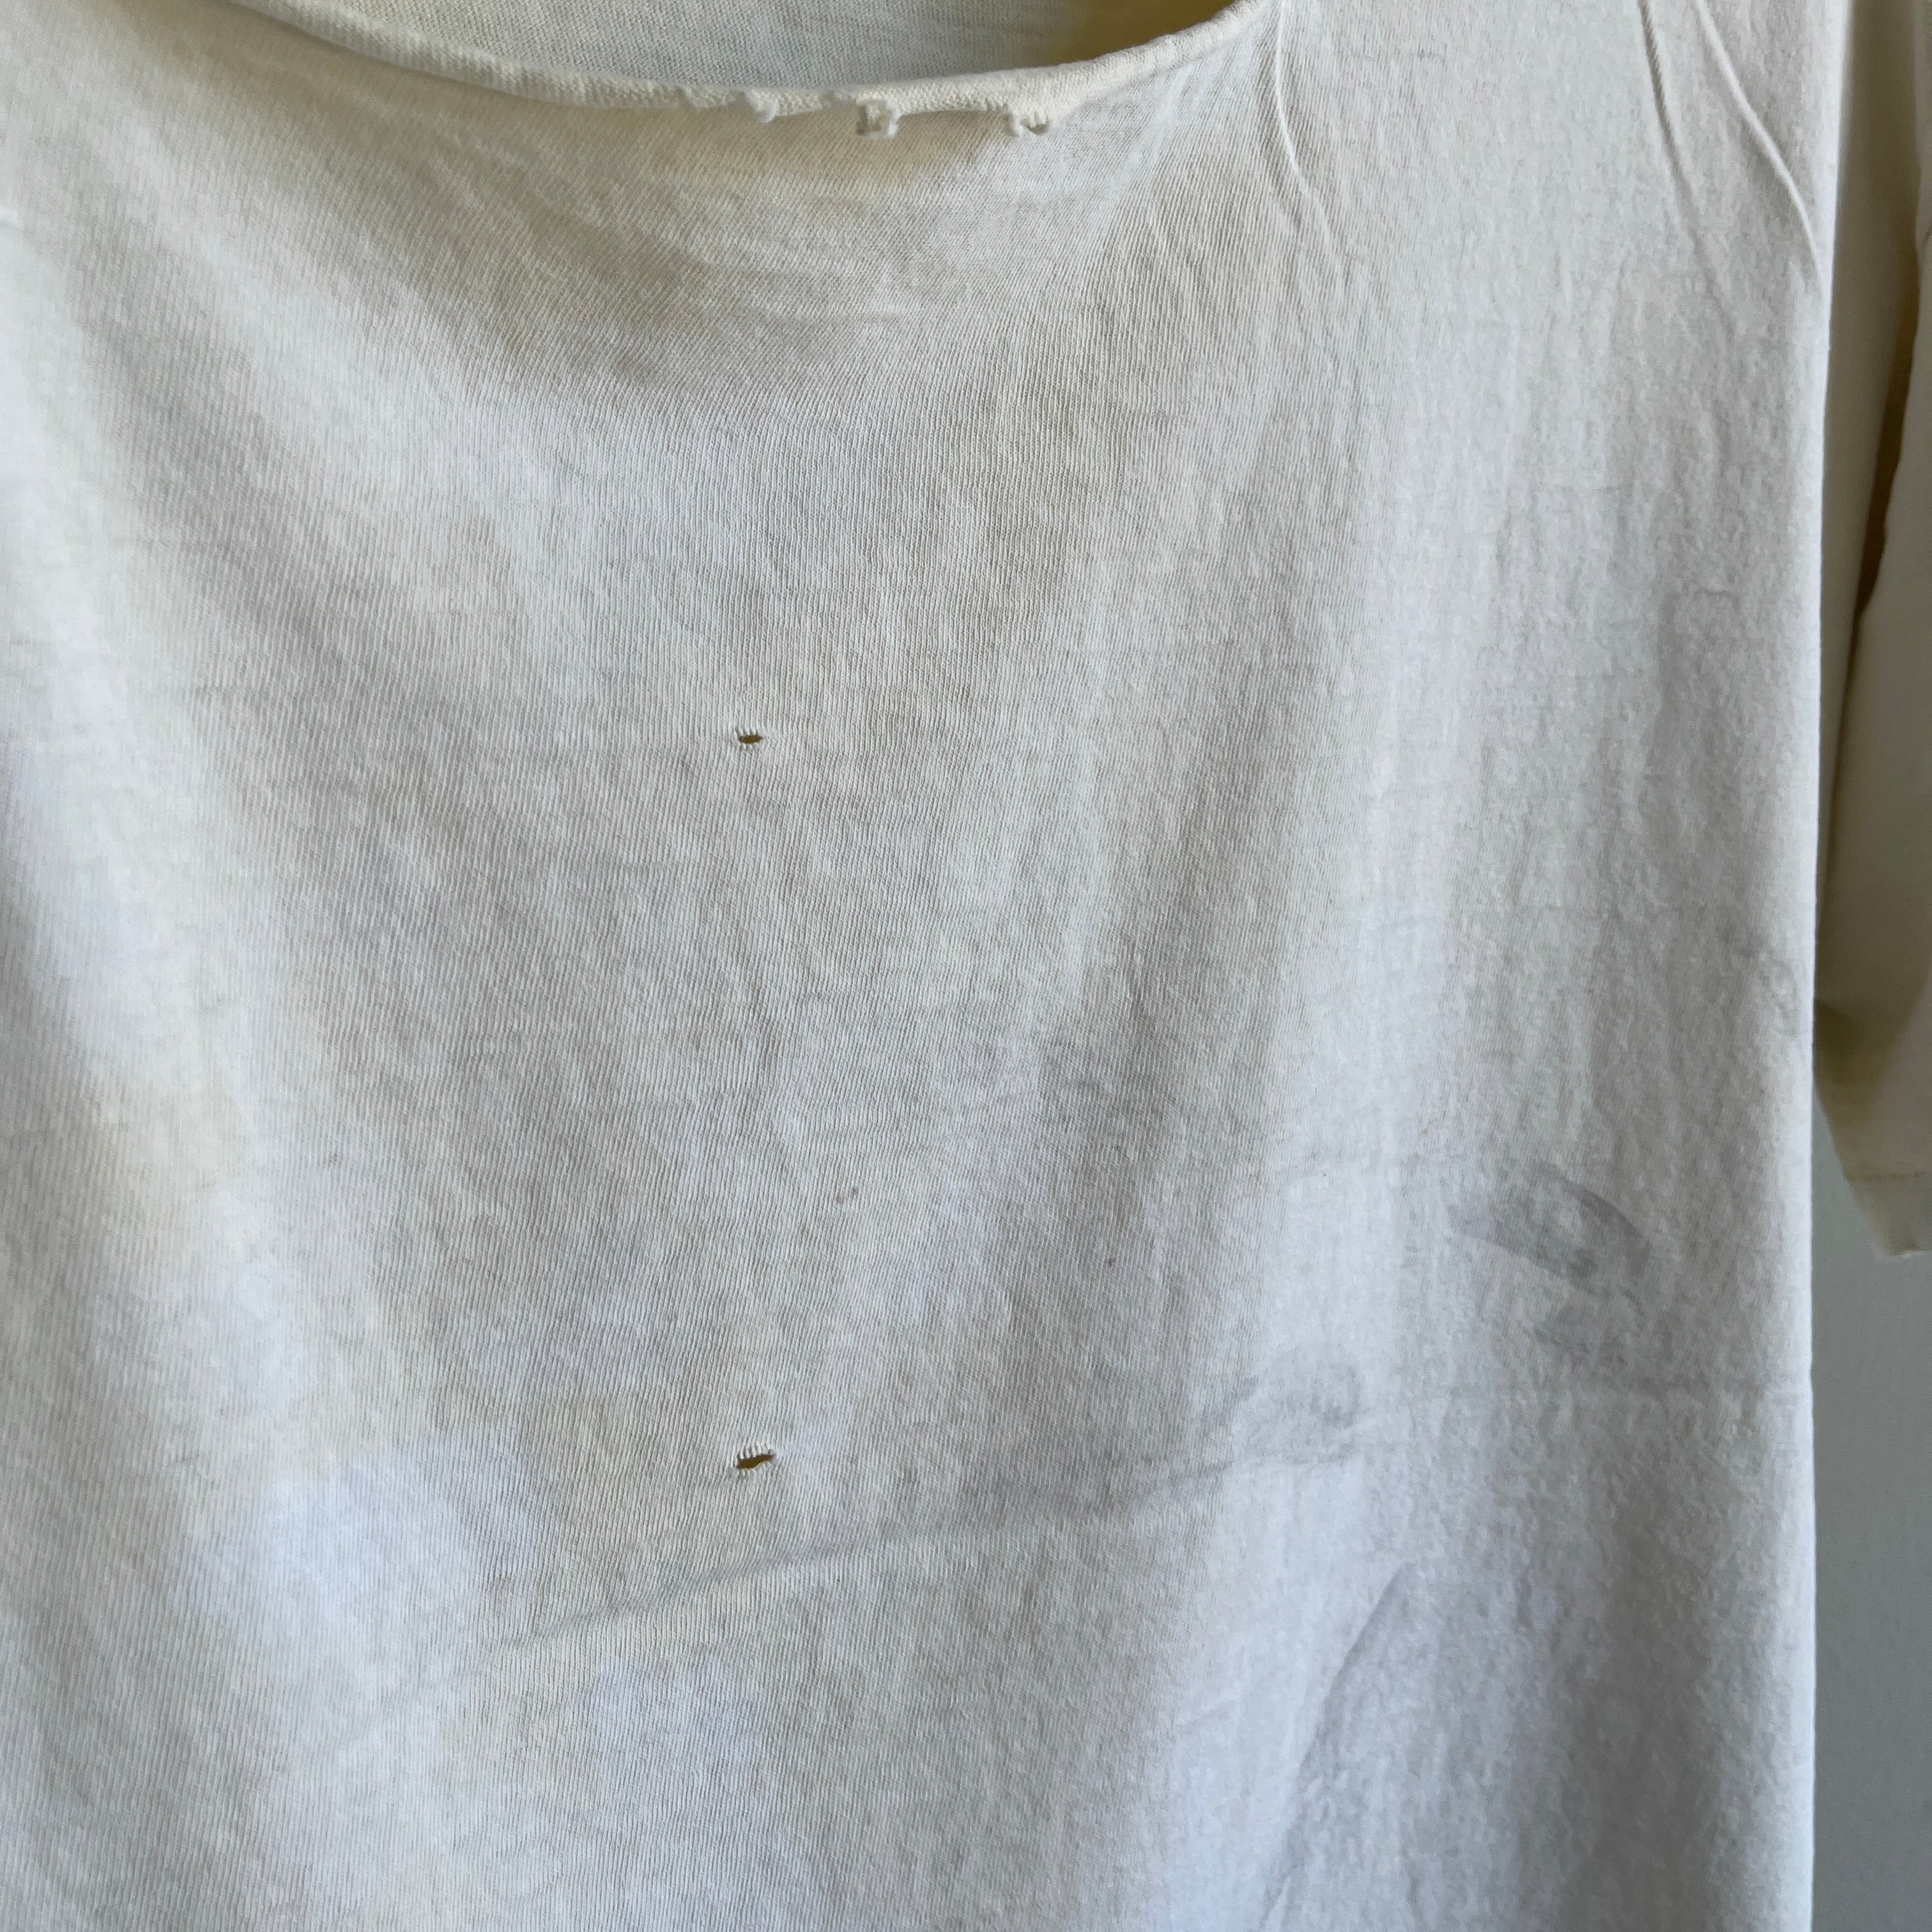 1990s Avalon Faded Out Destroyed Cotton T-Shirt by Russell